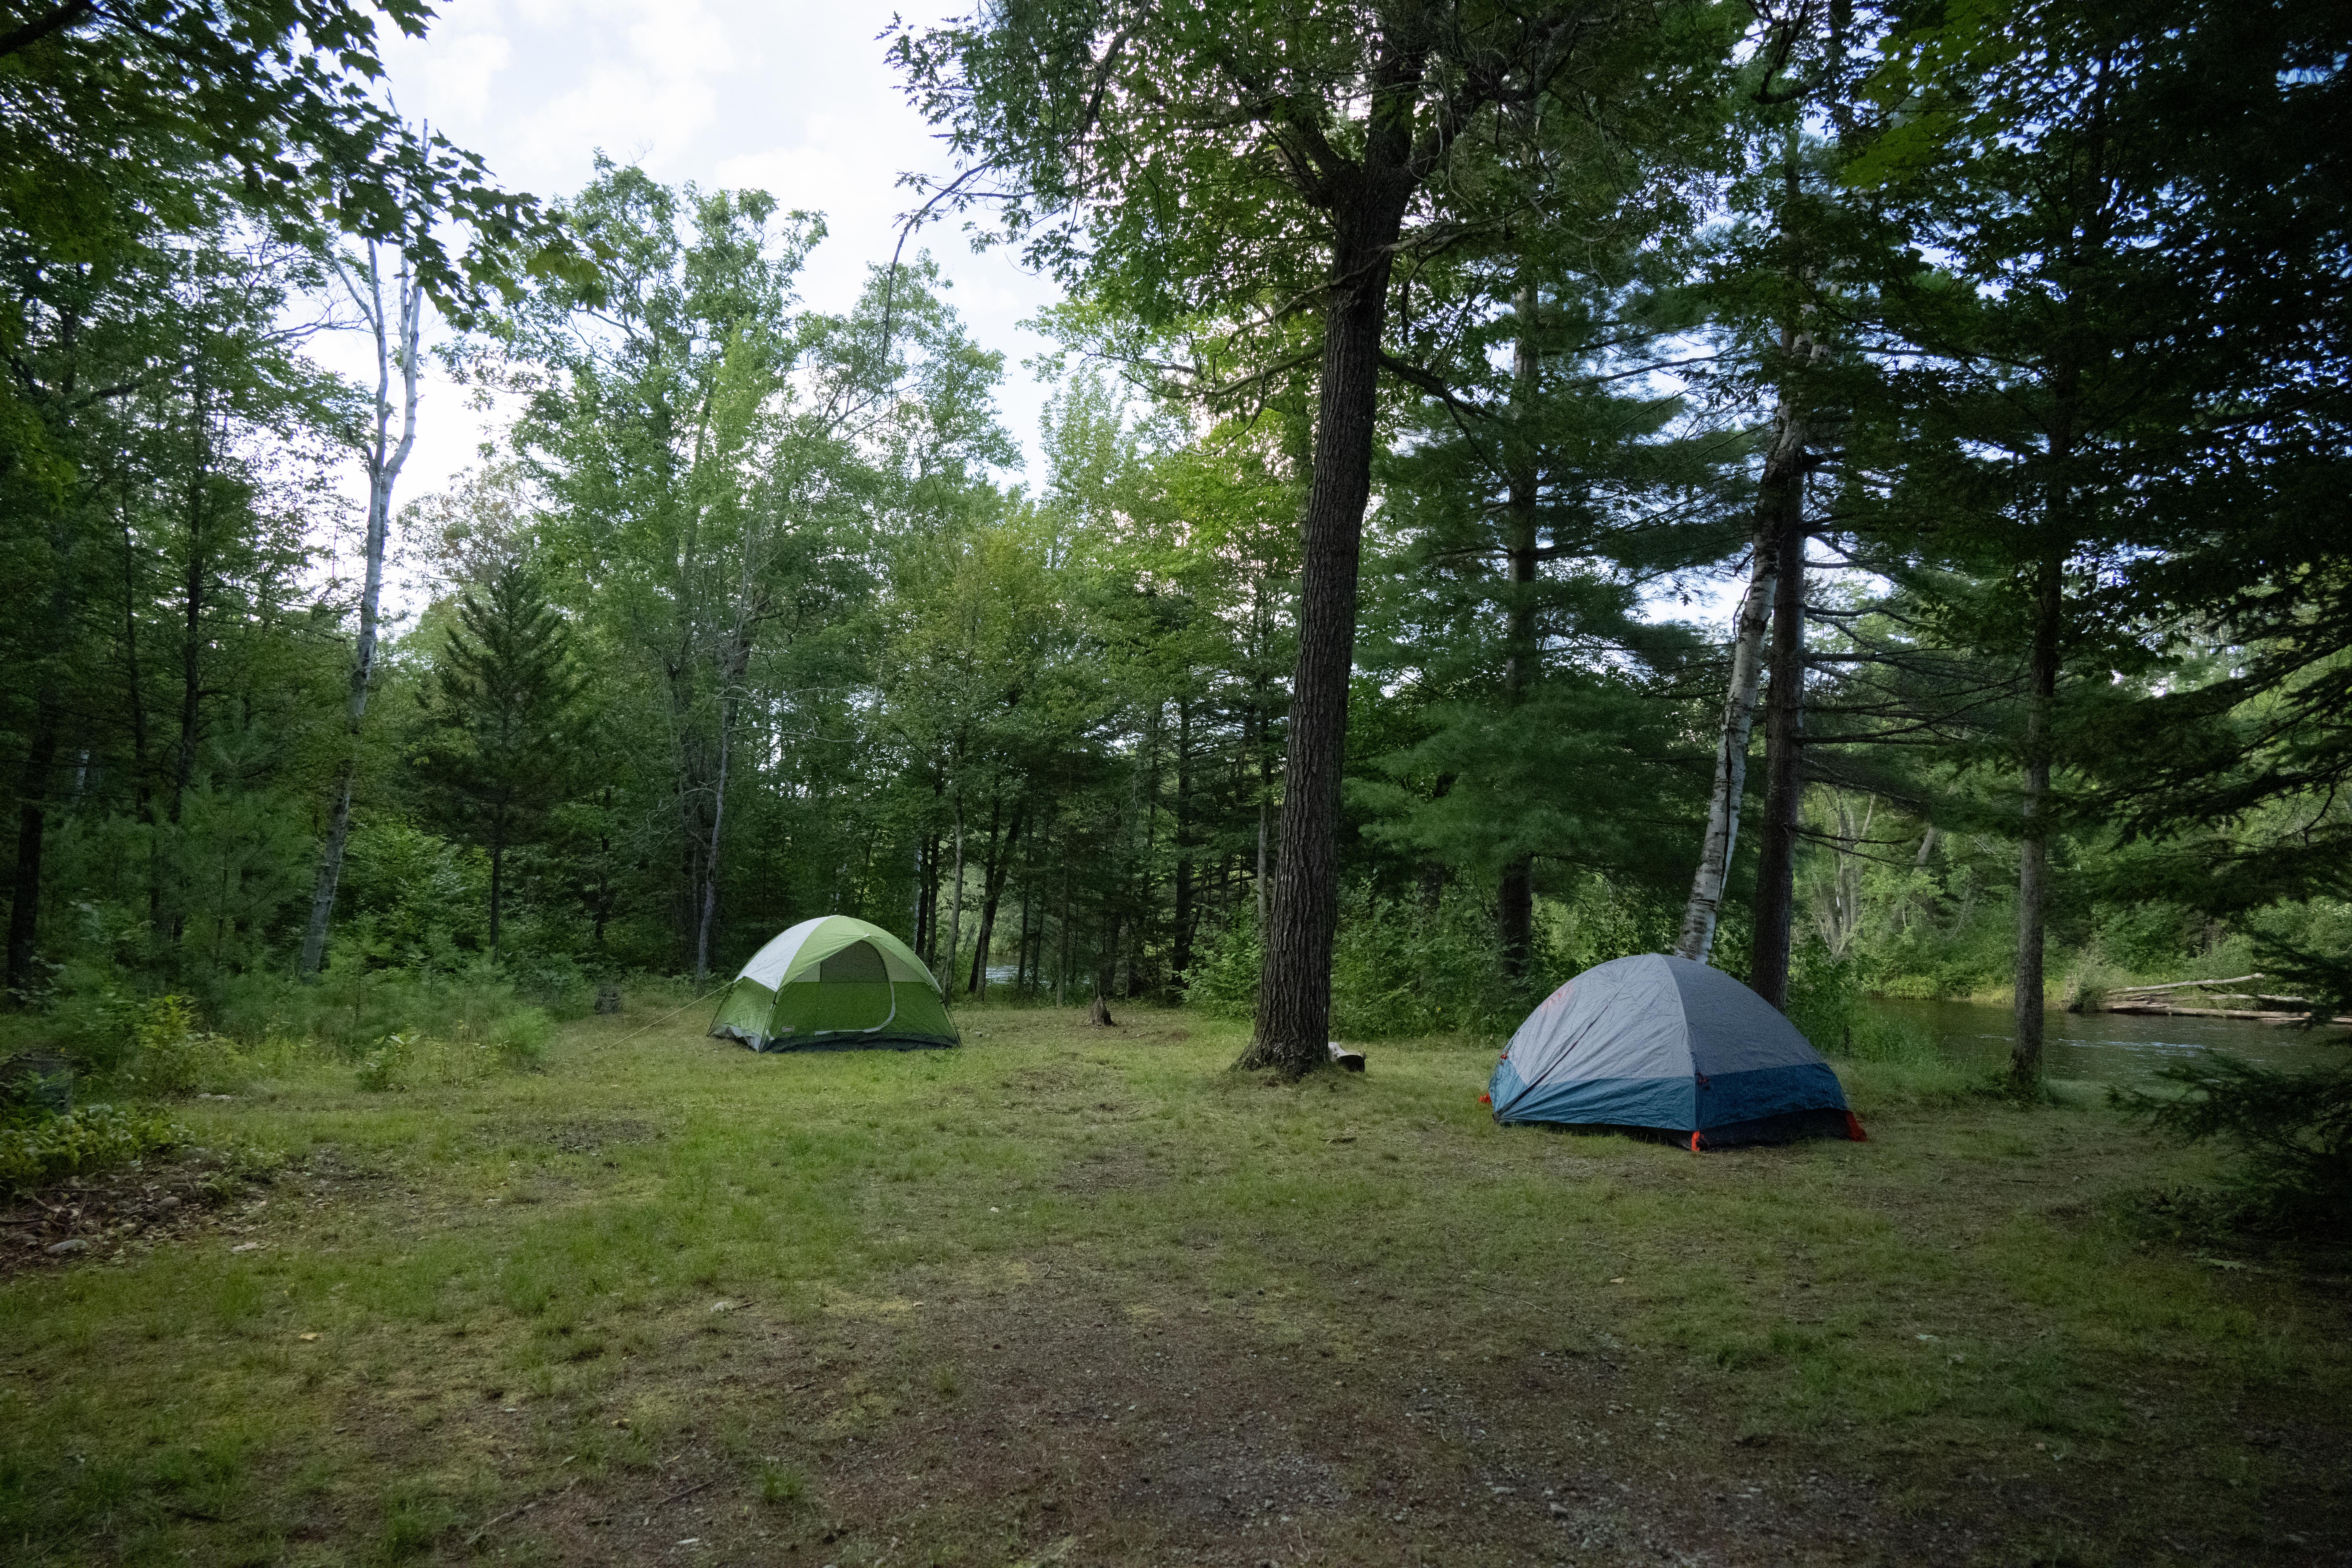 Two tents pitched on a flat grassy surface in the woods, a river runs in the background.